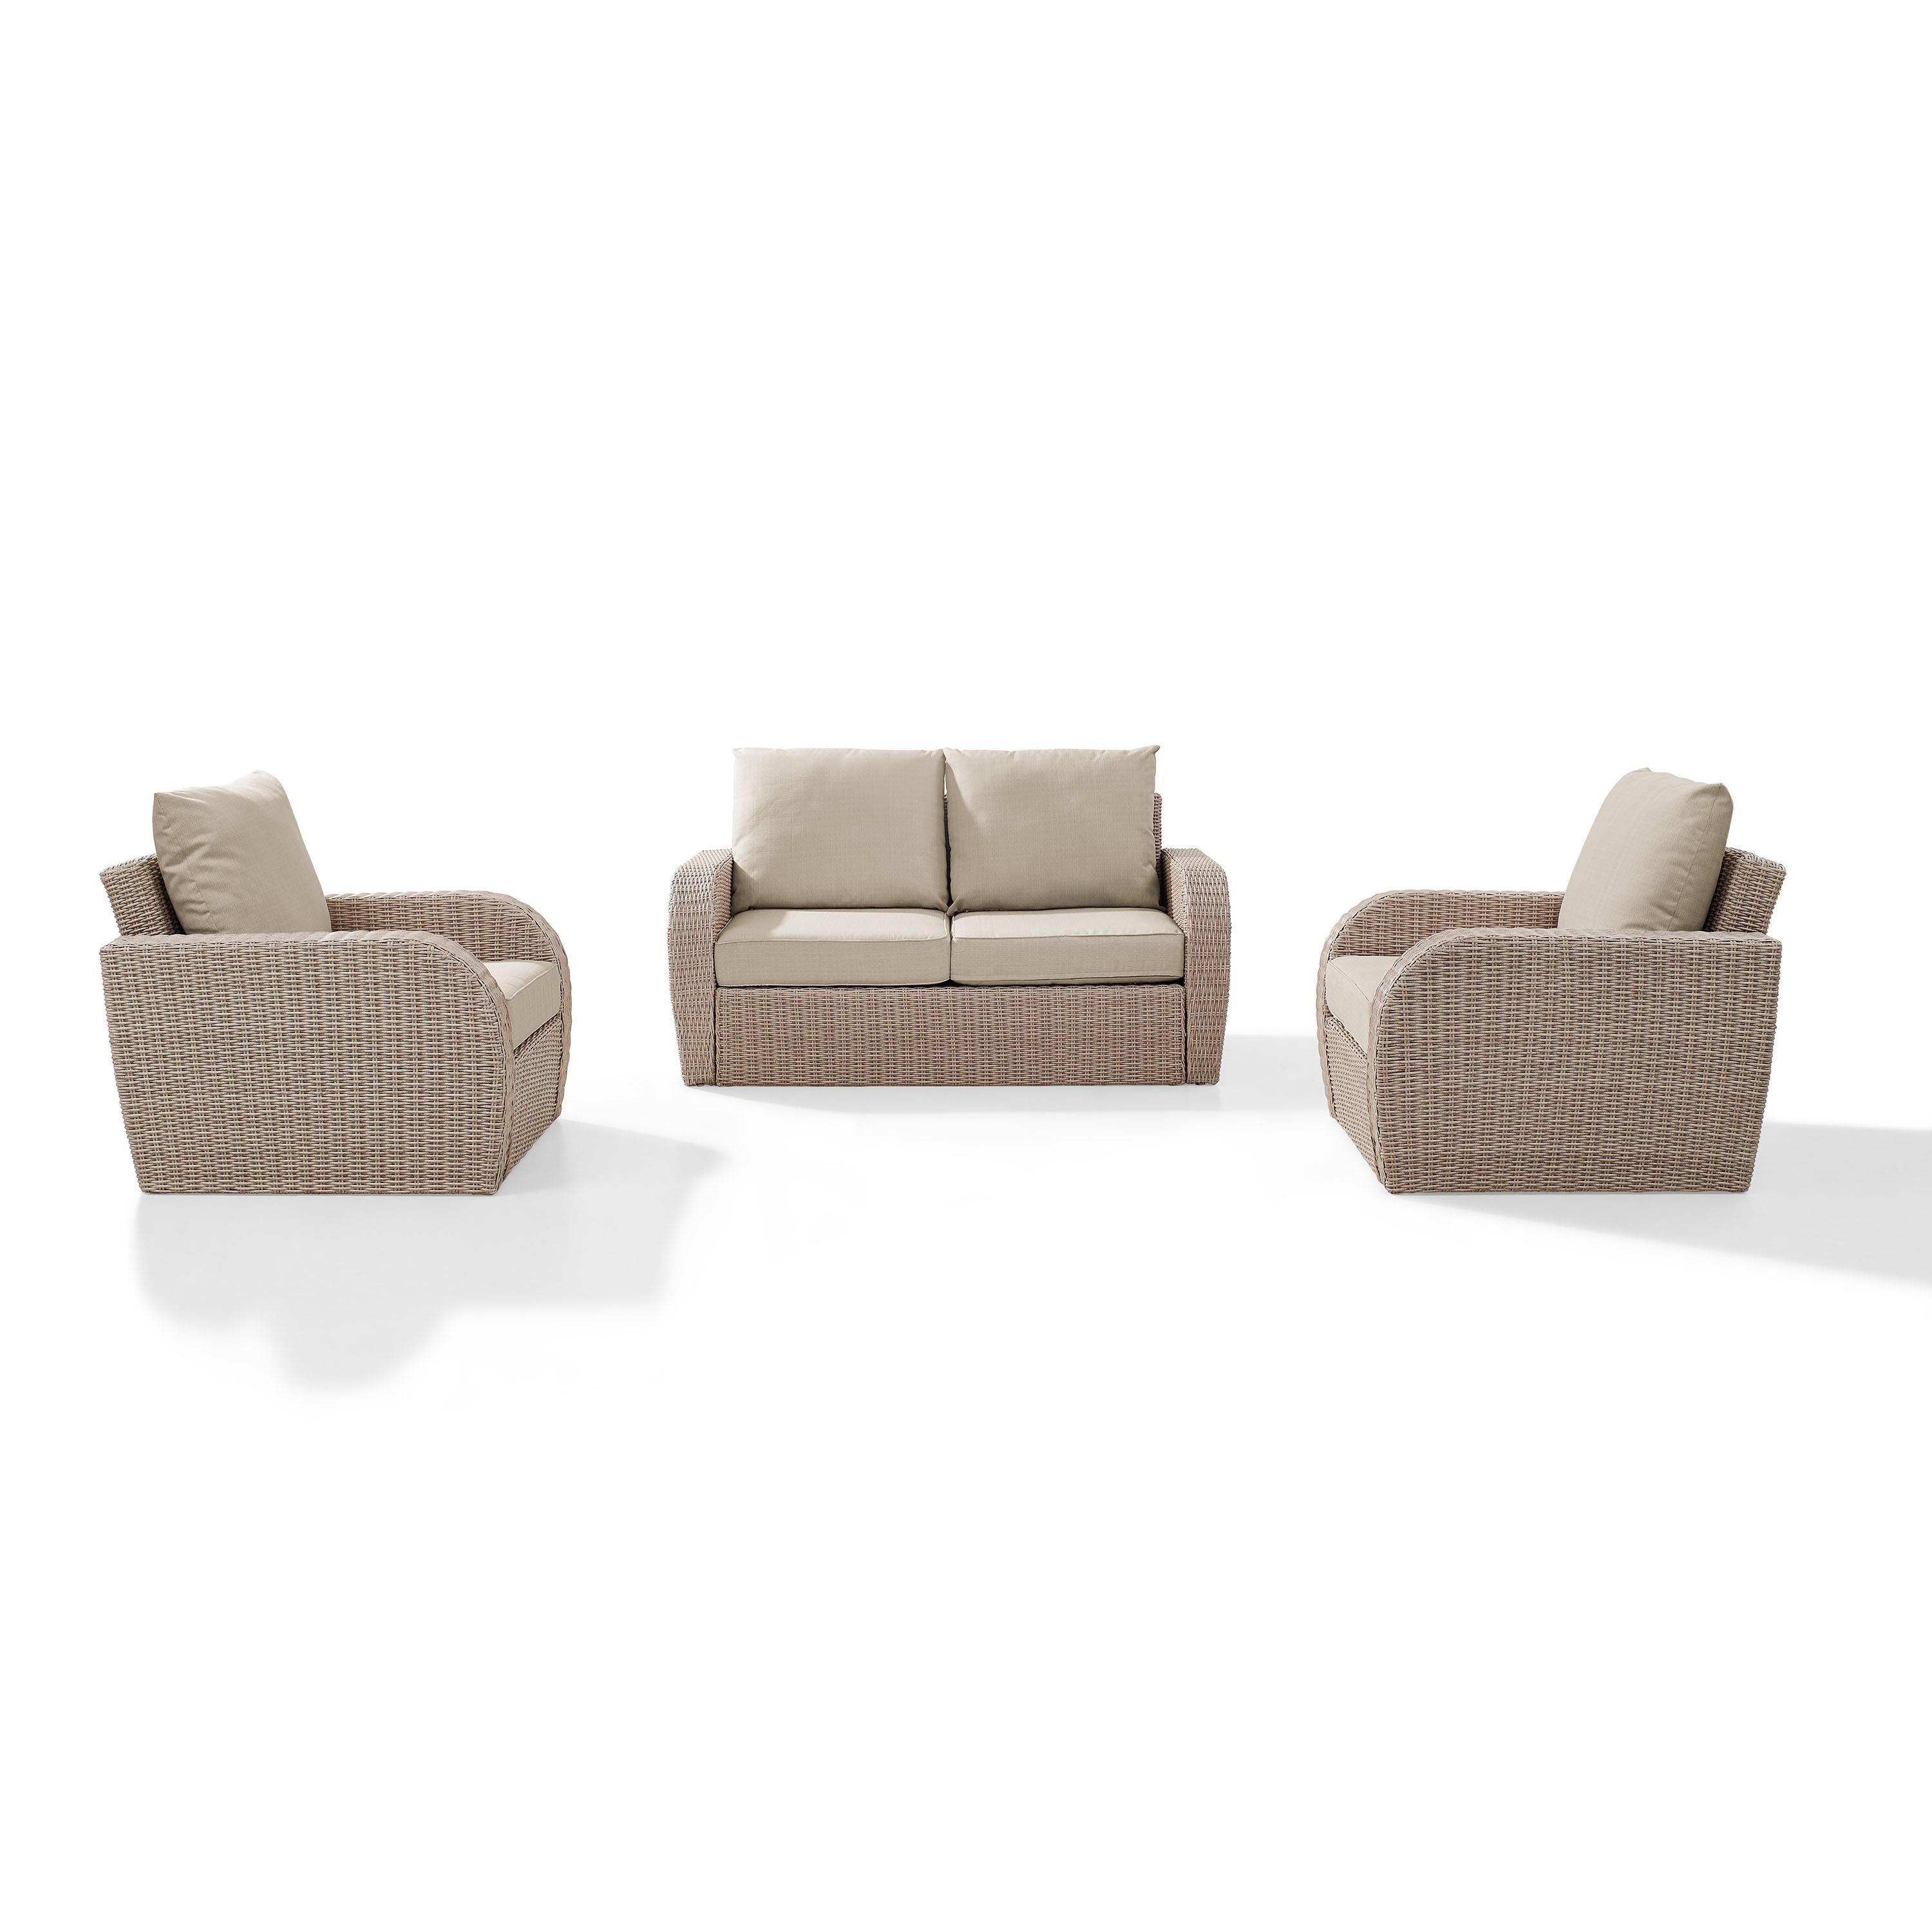 Crosley Furniture St Augustine 3 Pc Outdoor Wicker Seating Set With Oatmeal Cushion - Loveseat, Two Outdoor Chairs - image 2 of 5